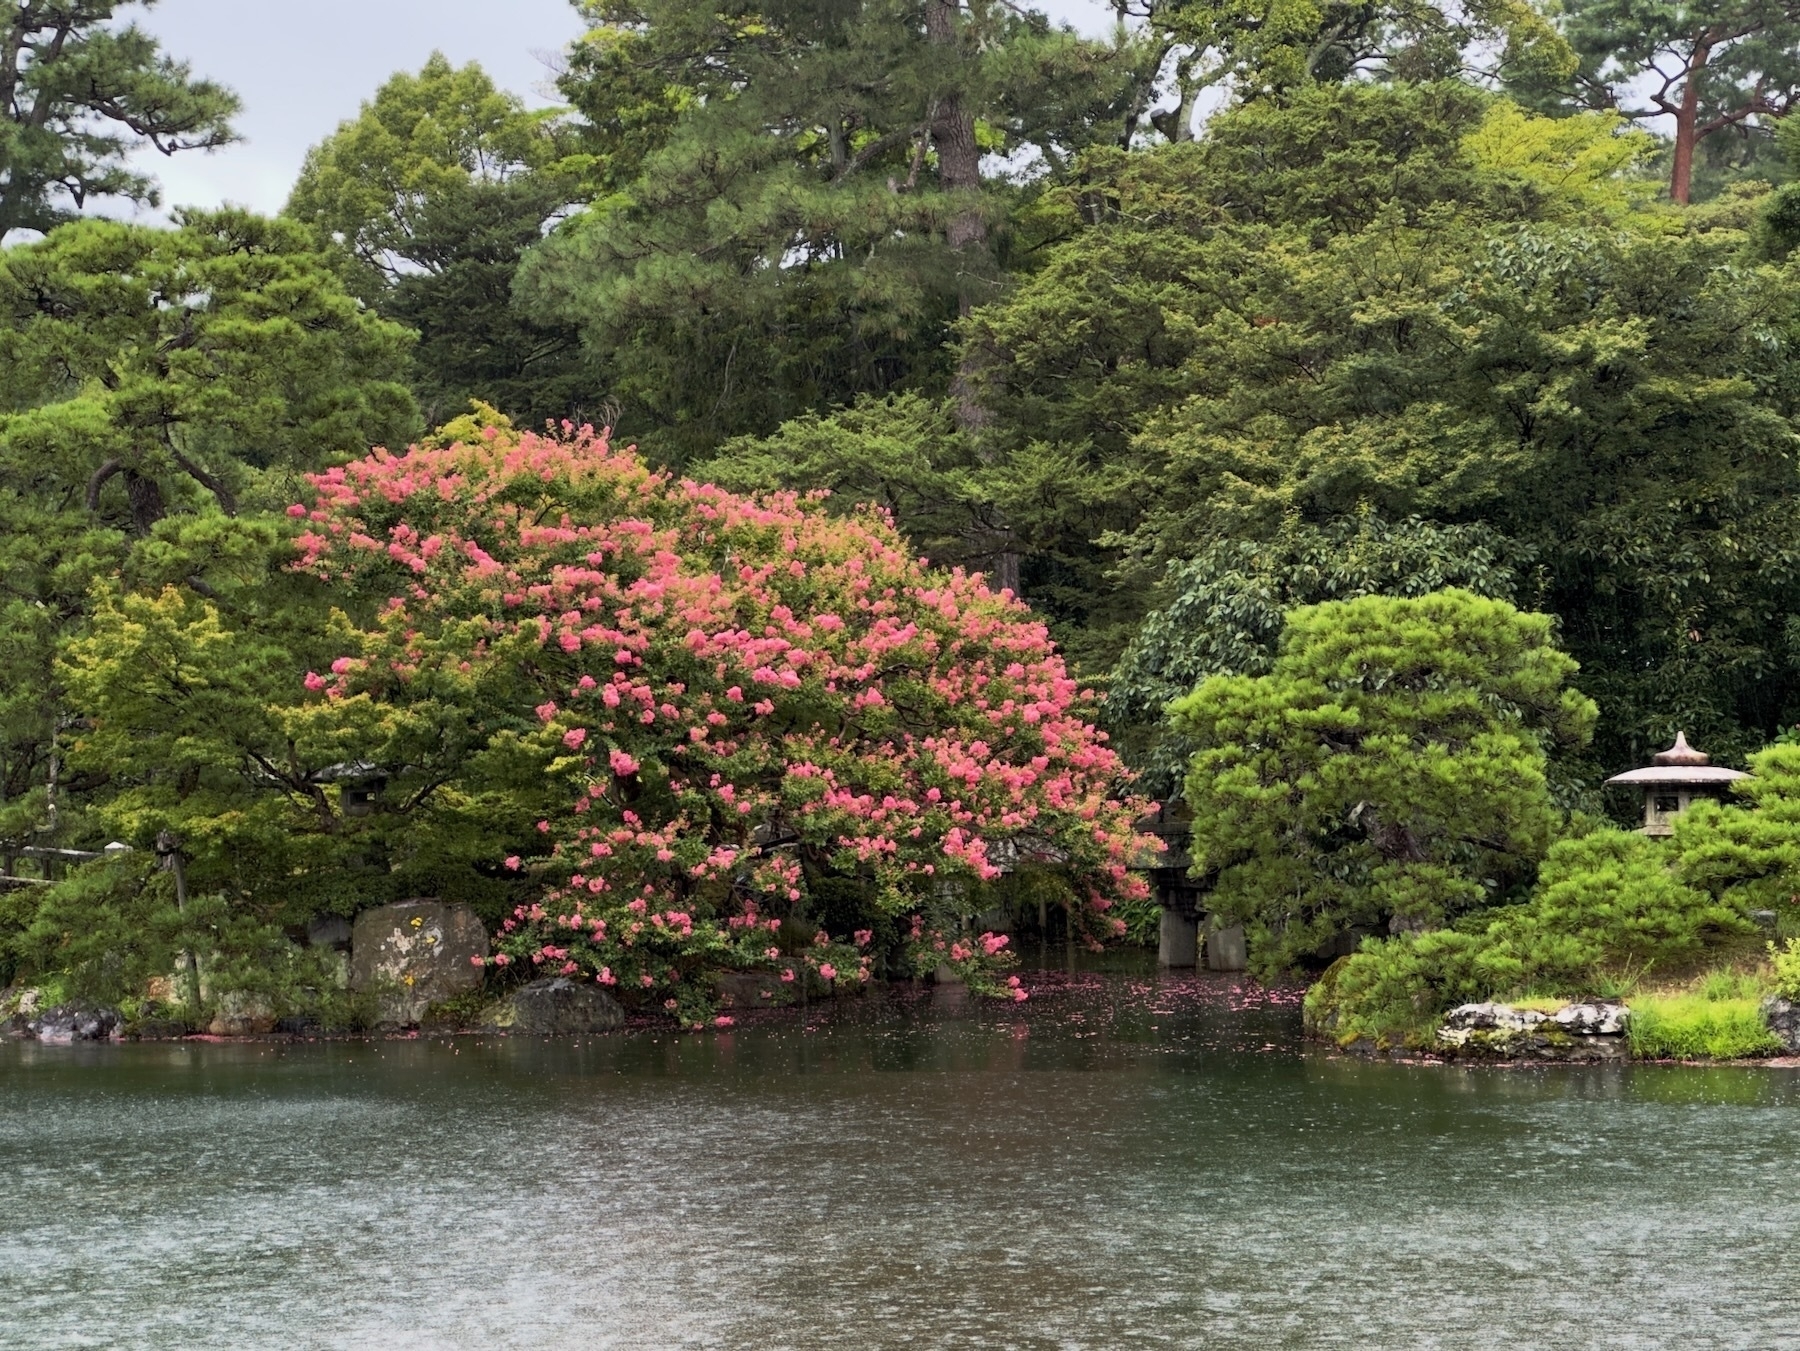 A red leaved tree by the imperial palace lake